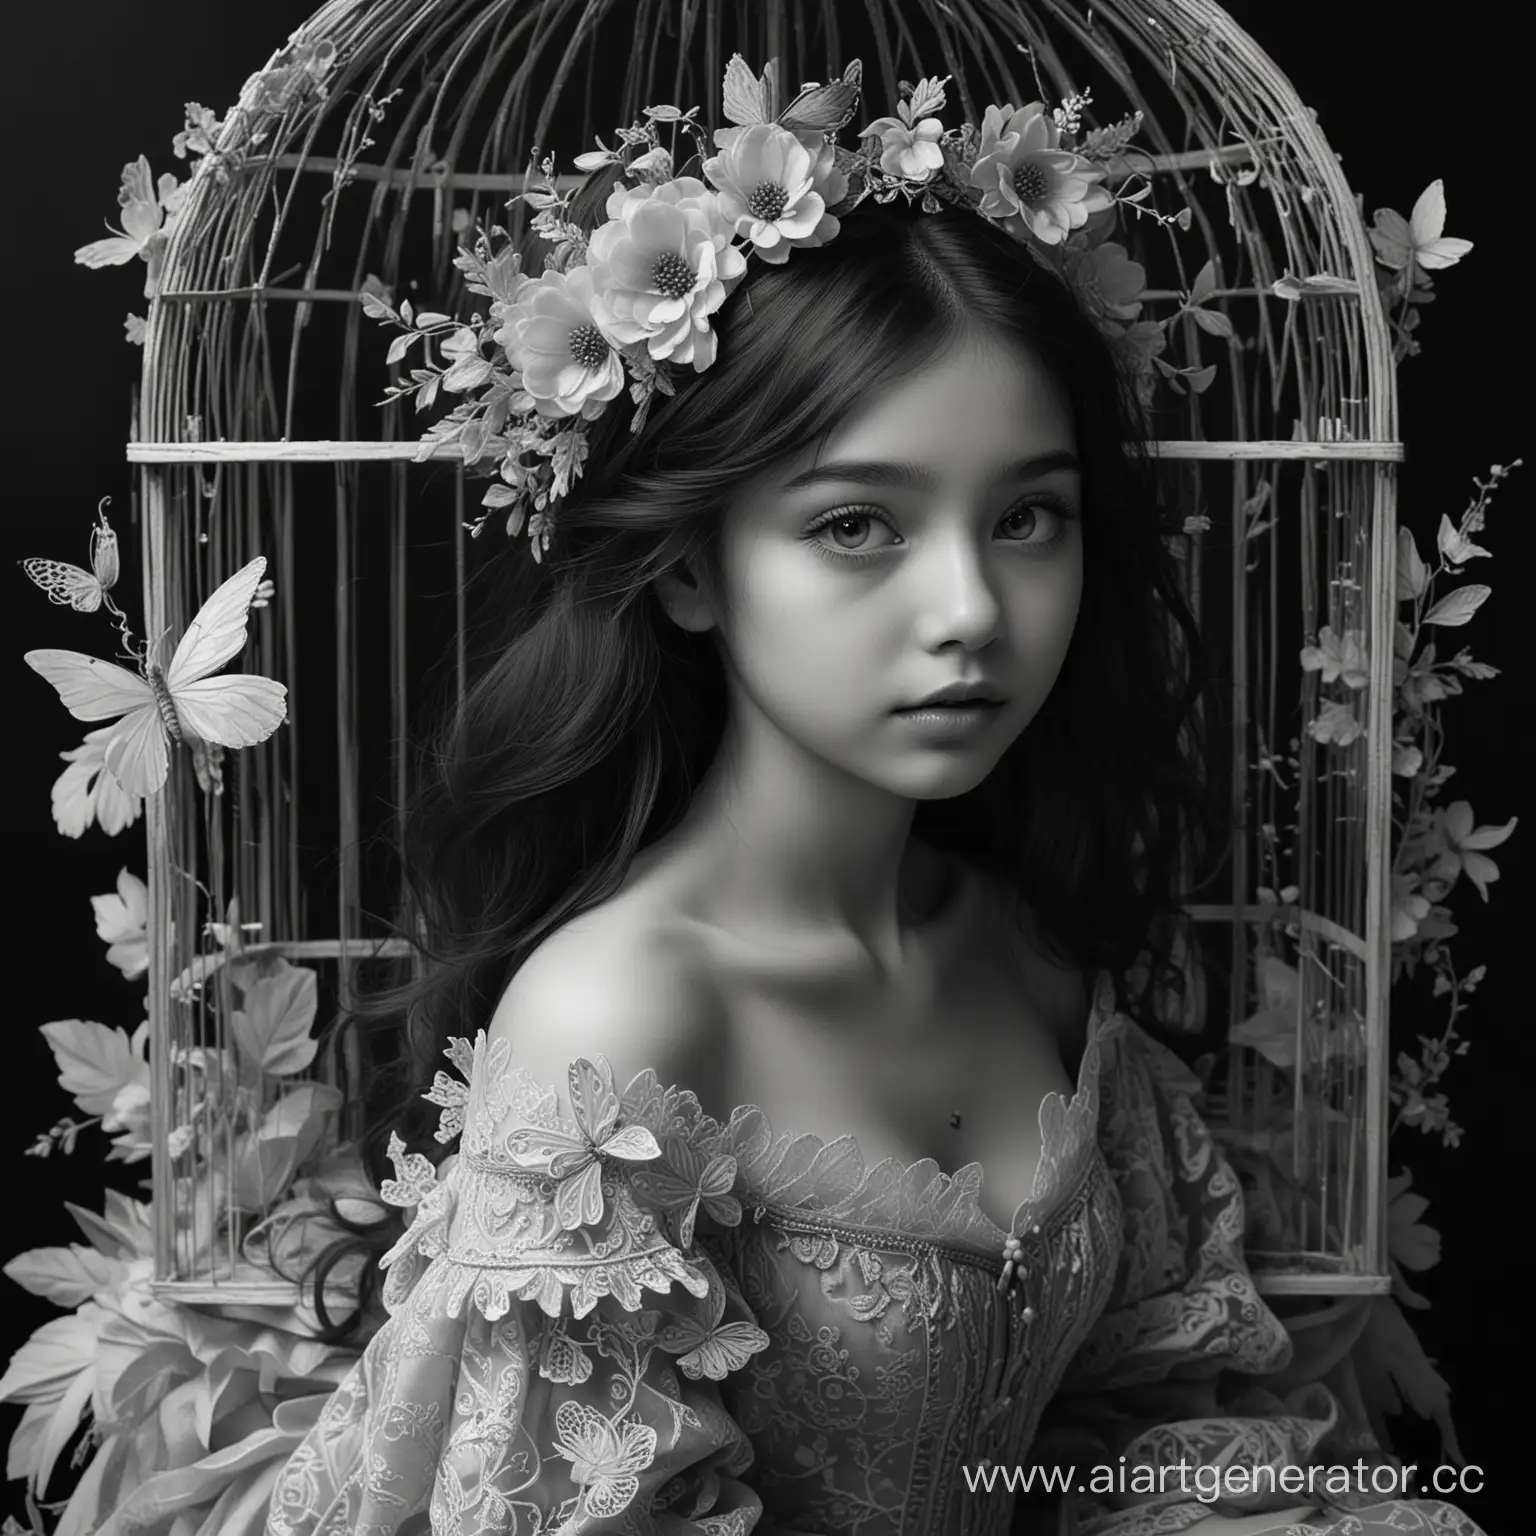 Monochrome-Girl-Sitting-on-Birdcage-Delicate-Beauty-in-Black-and-White-with-Detailed-Features-and-Butterfly-Wings